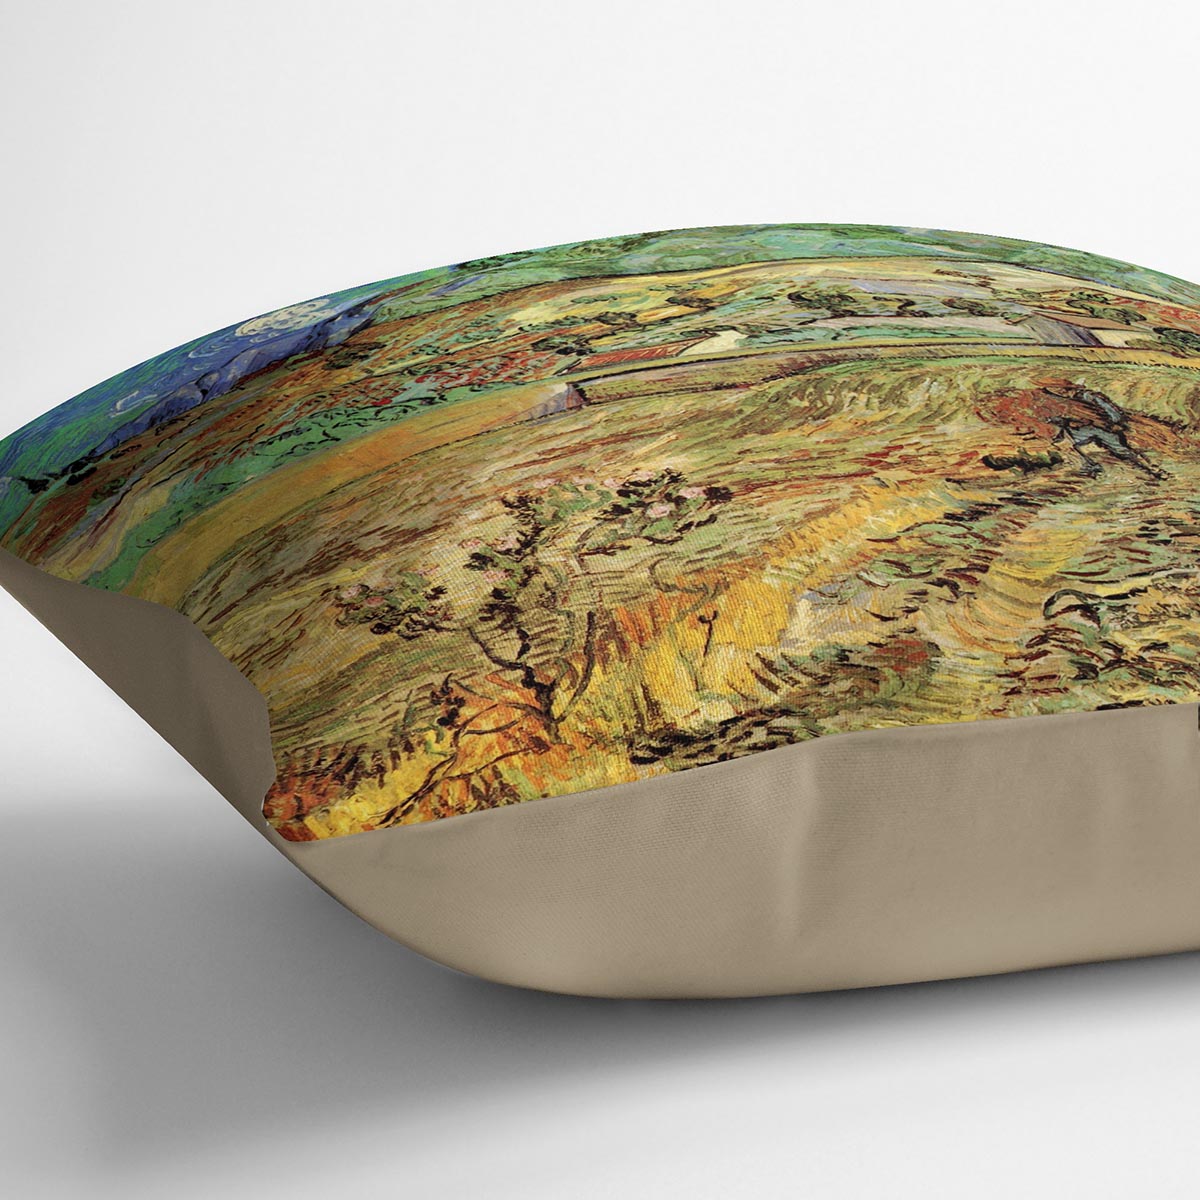 Enclosed Wheat Field with Peasant by Van Gogh Cushion